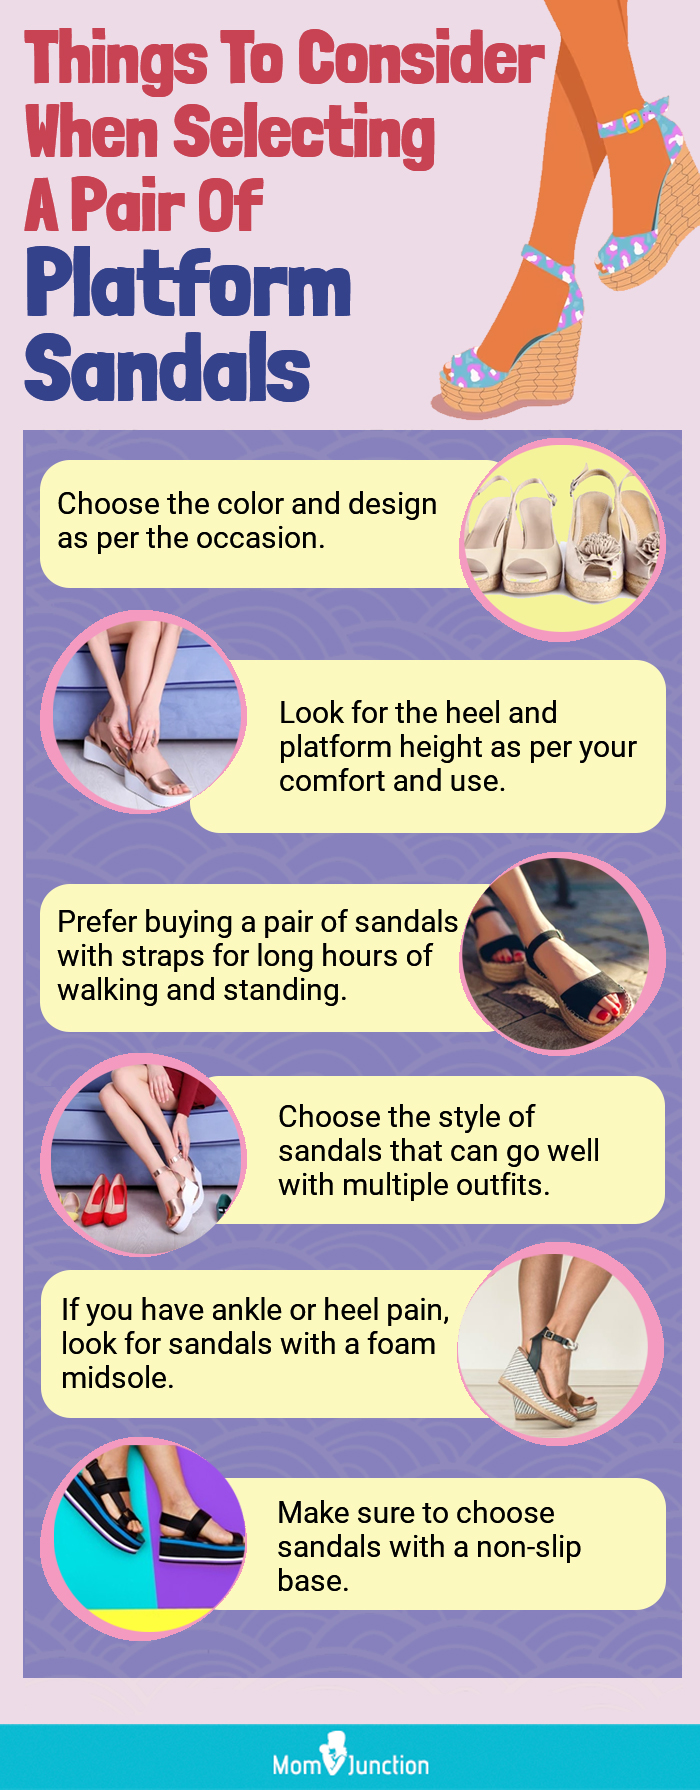 Things To Consider When Selecting A Pair Of Platform Sandals (infographic)